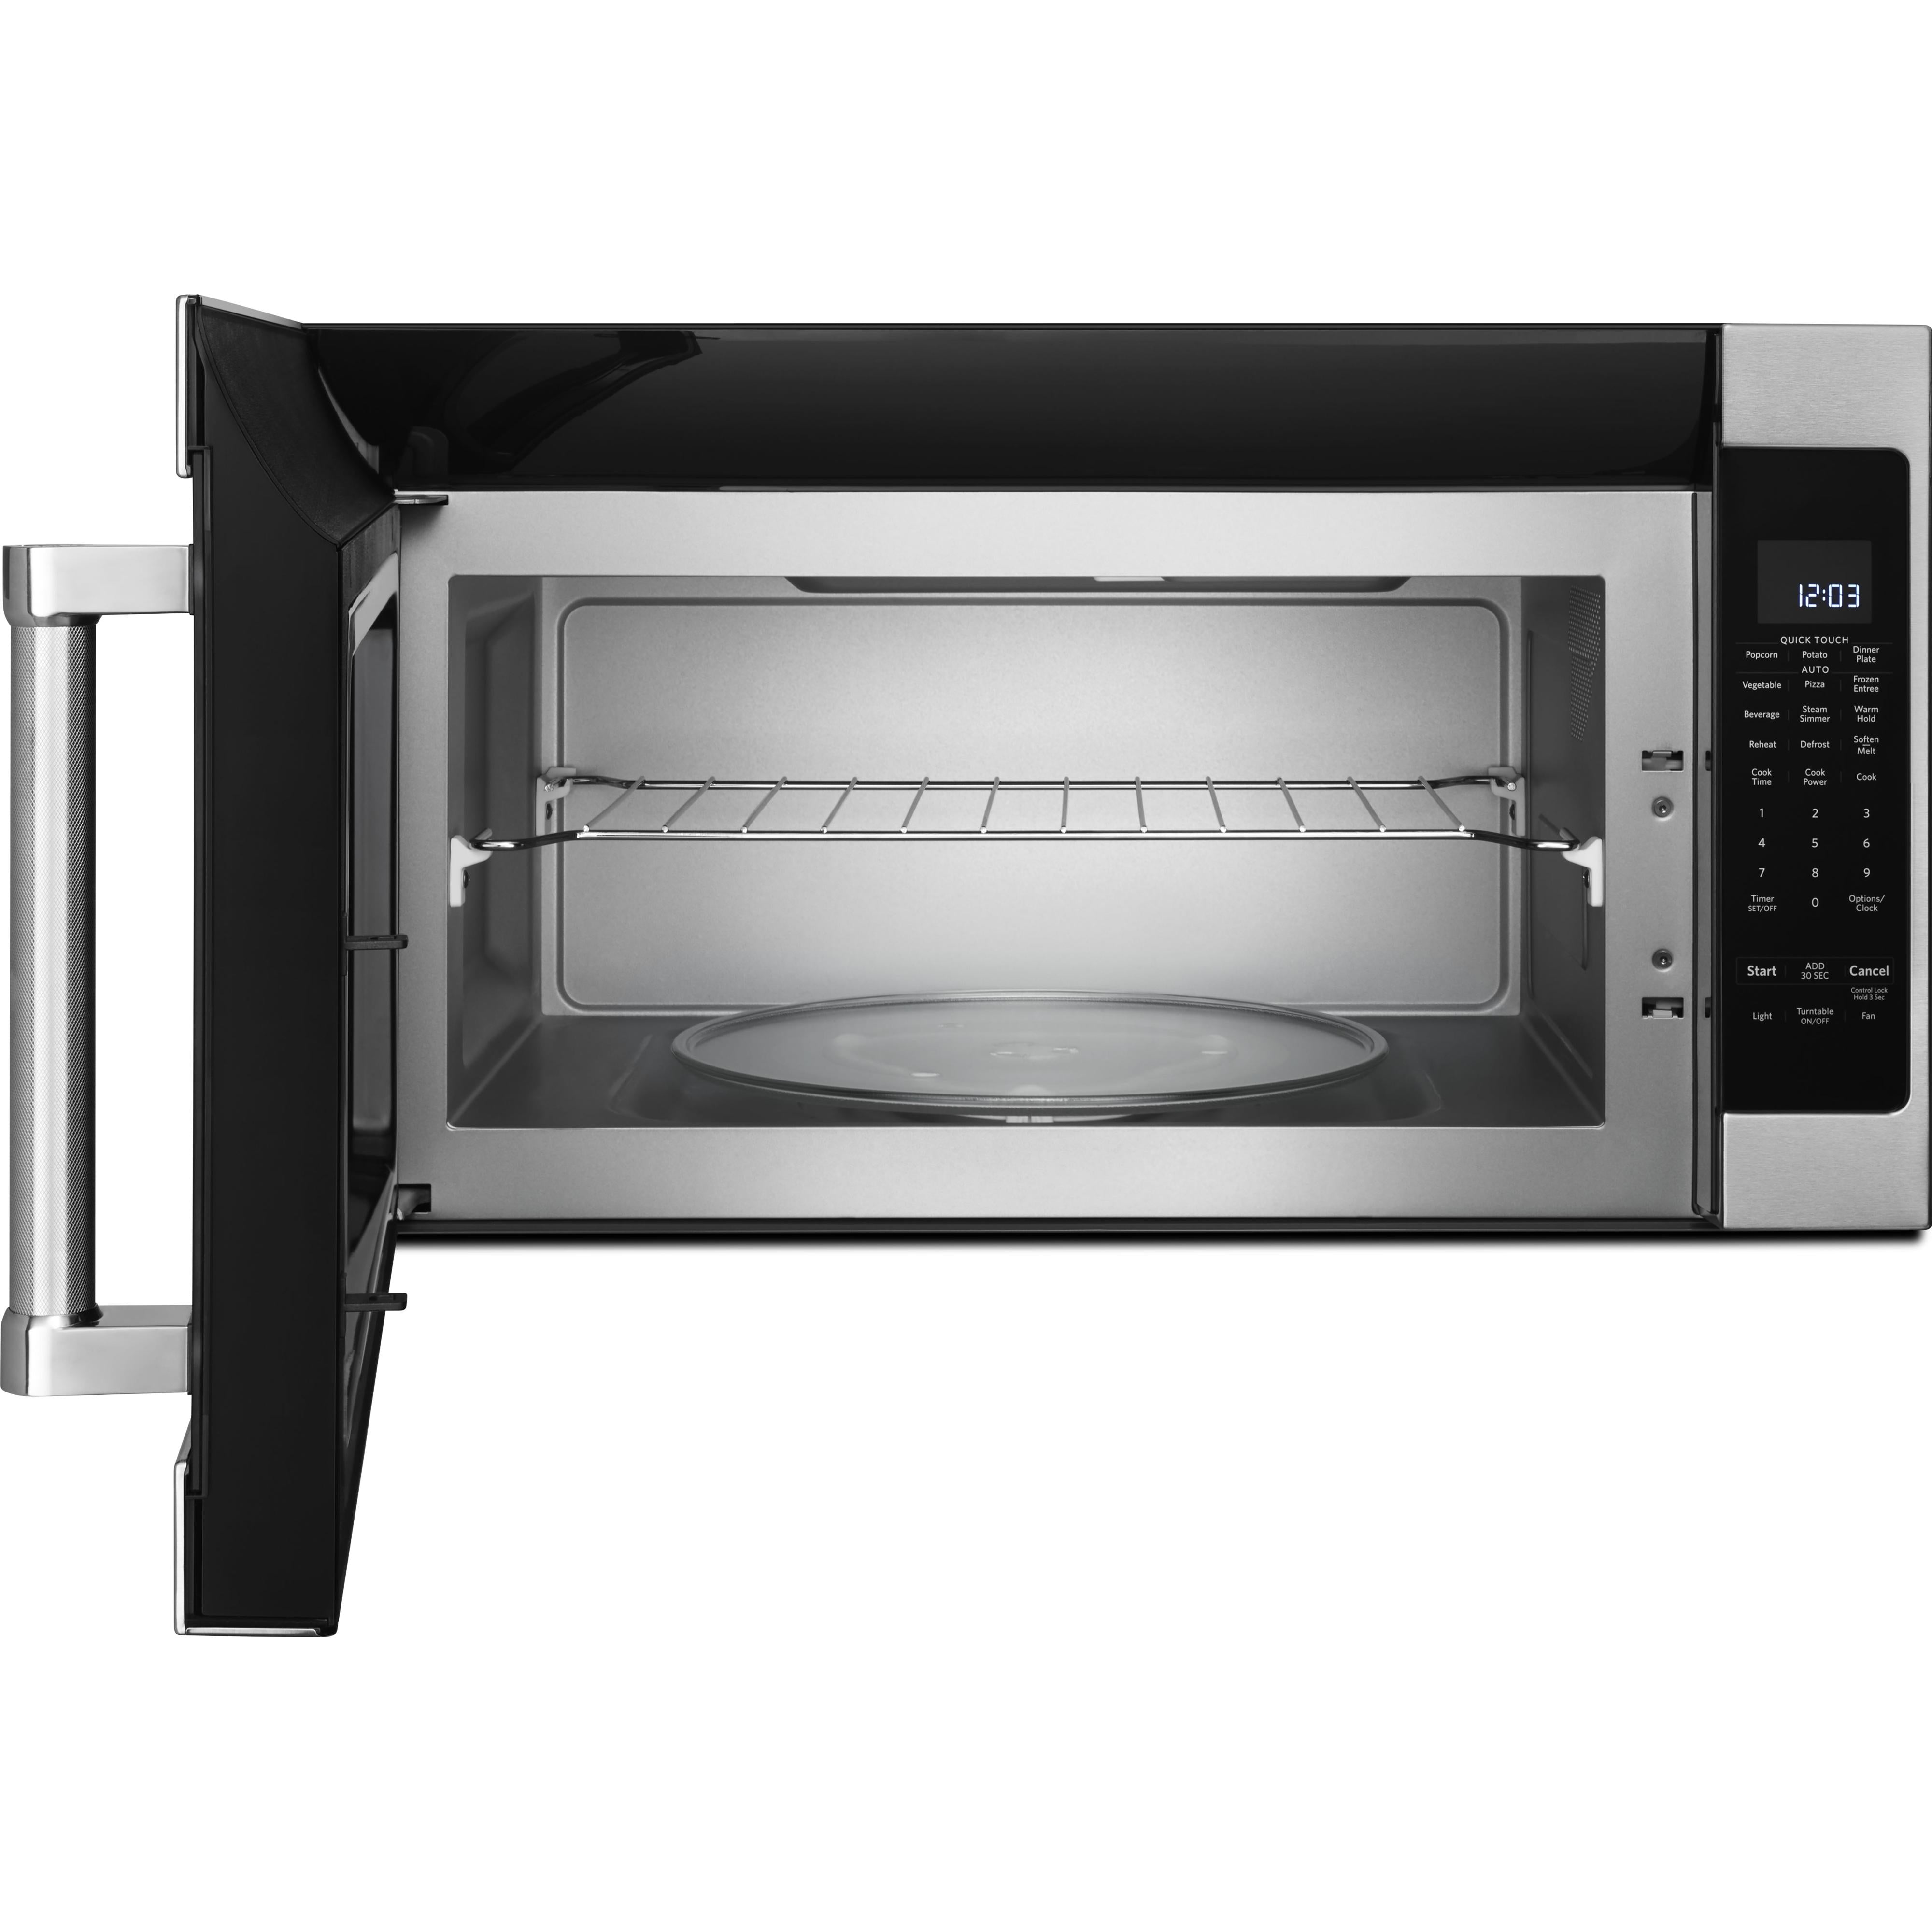 KitchenAid 30-inch, 2 cu. ft. Over-the-Range Microwave Oven KMHS120ESS